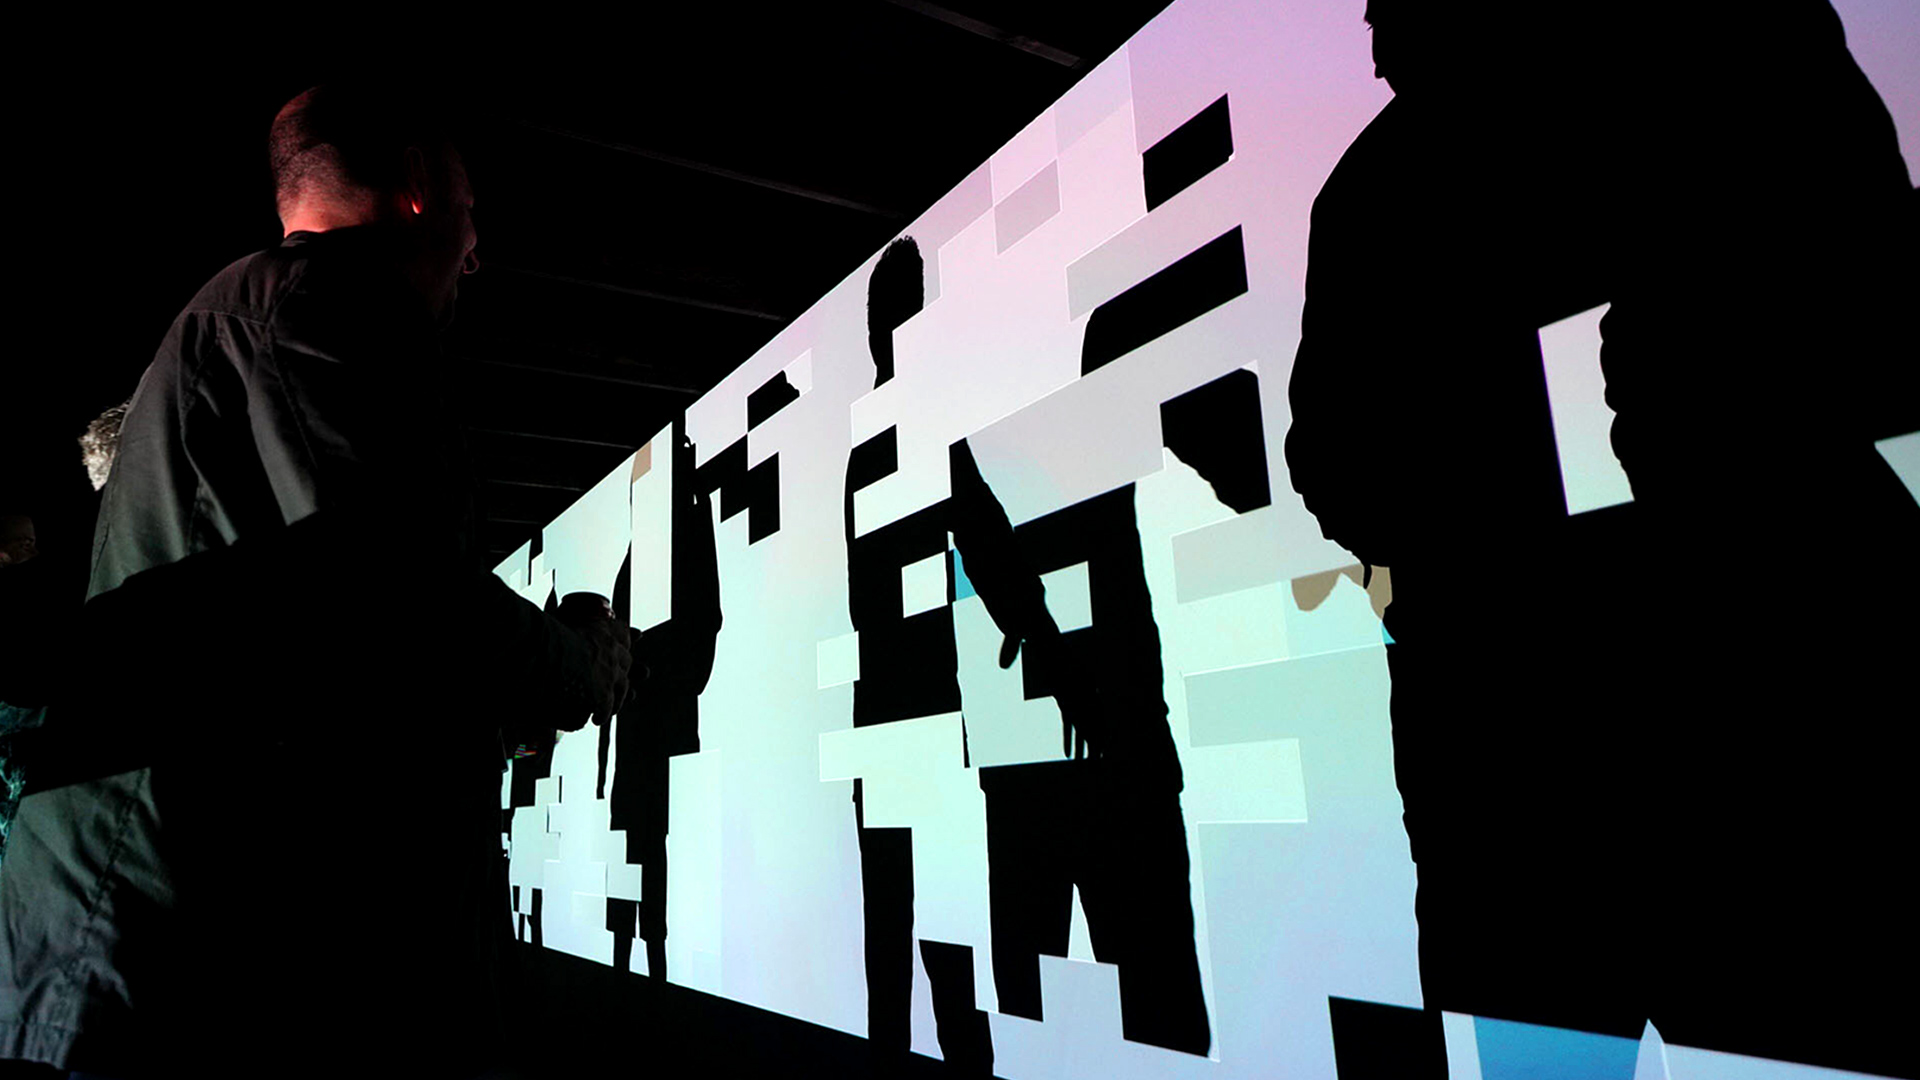 Fragment Shadow - Generating Fragmented Shadows with Multi-Projectors Geometry and Color Calibration